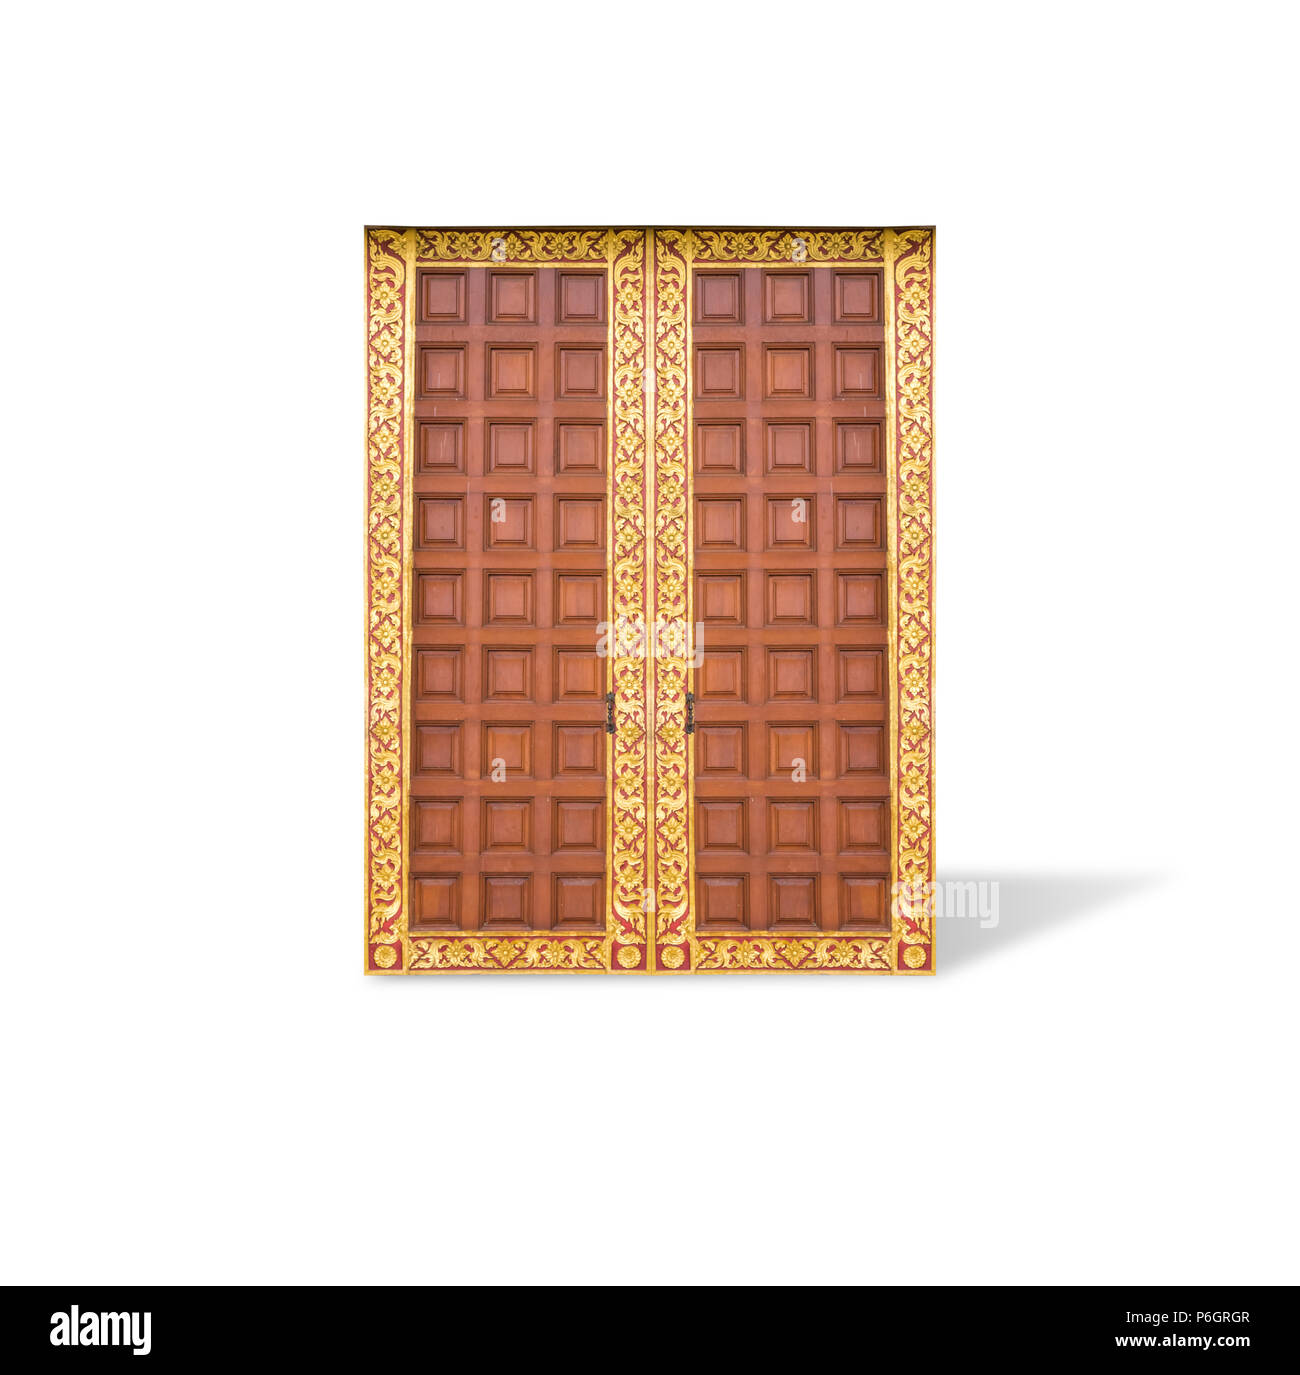 Wooden door with Thai ornamental motif, isolated on white background with clipping path. Stock Photo